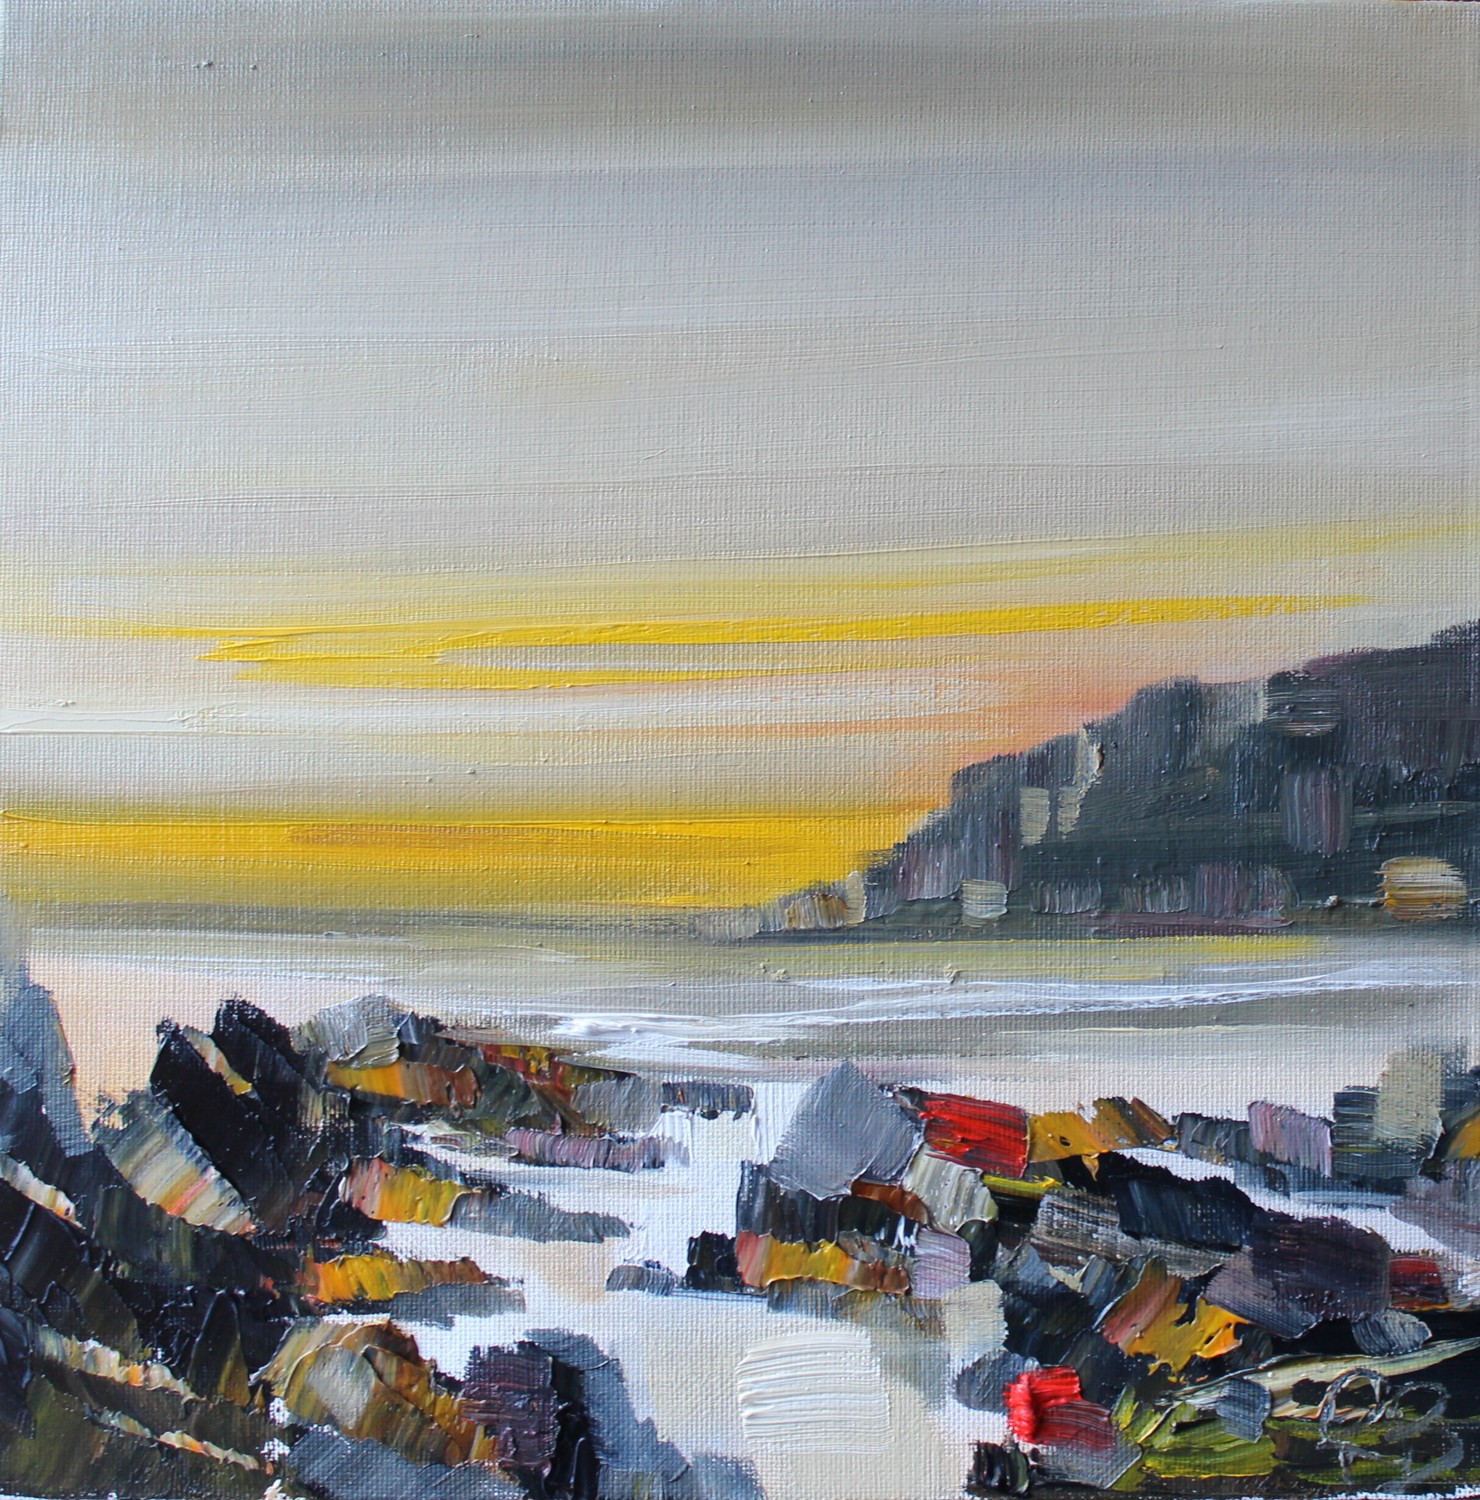 'Clambering over the rocks' by artist Rosanne Barr